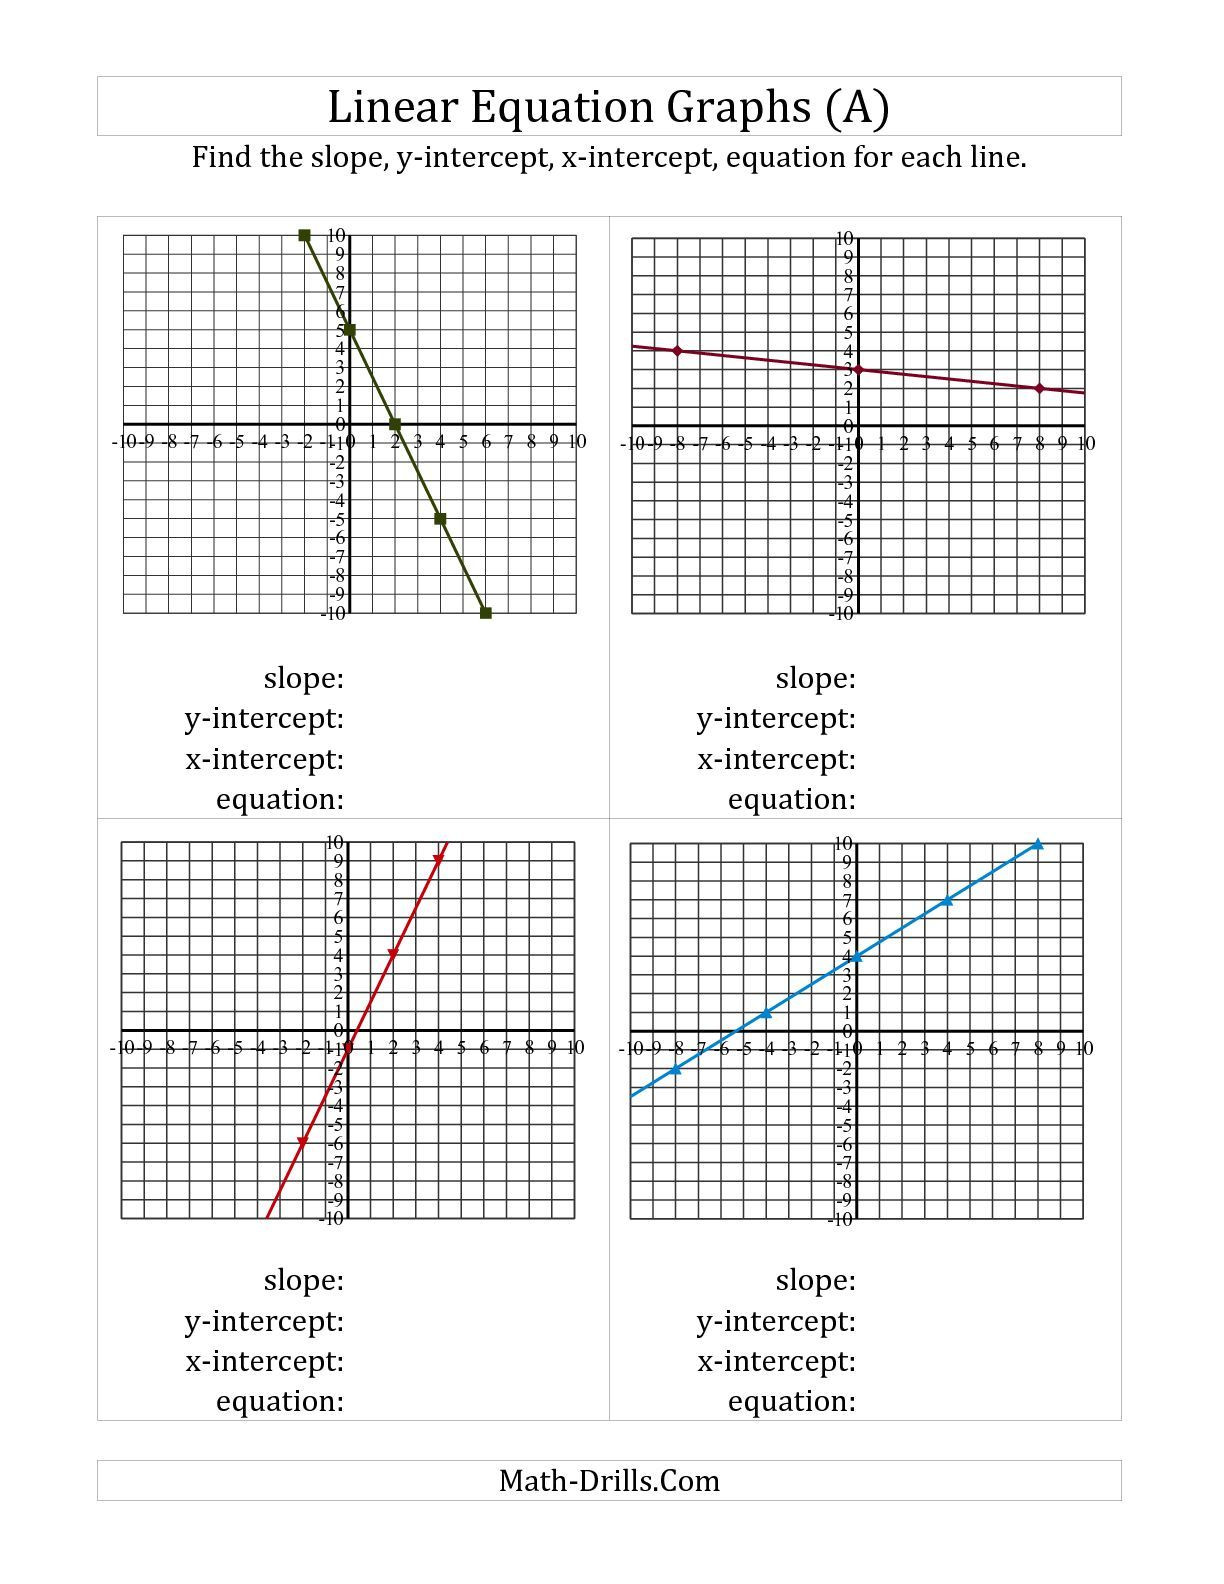 Graphing Linear Equations Worksheet Pdf Worksheets Splendi Graphingnear Equations Worksheet Image